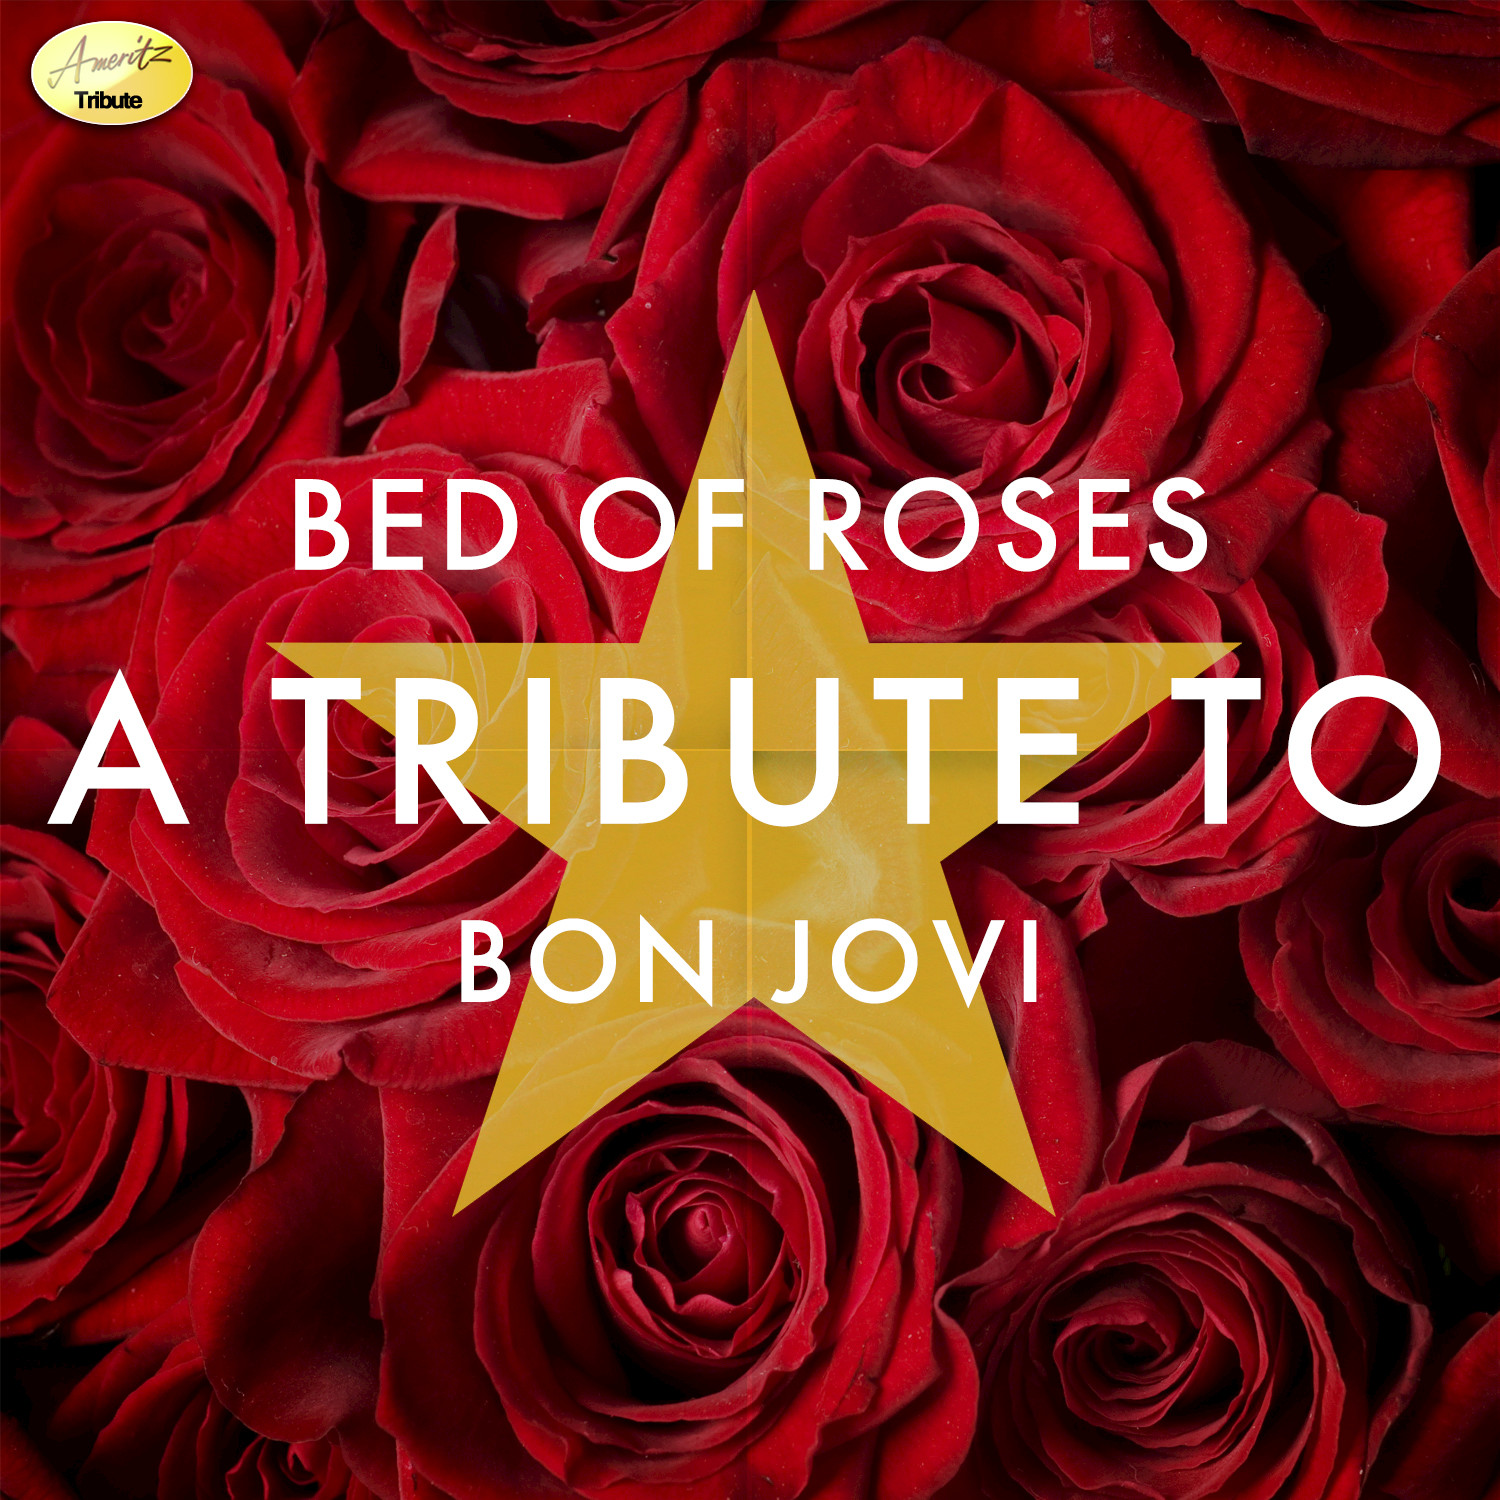 Bed of Roses: A Tribute to Bon Jovi